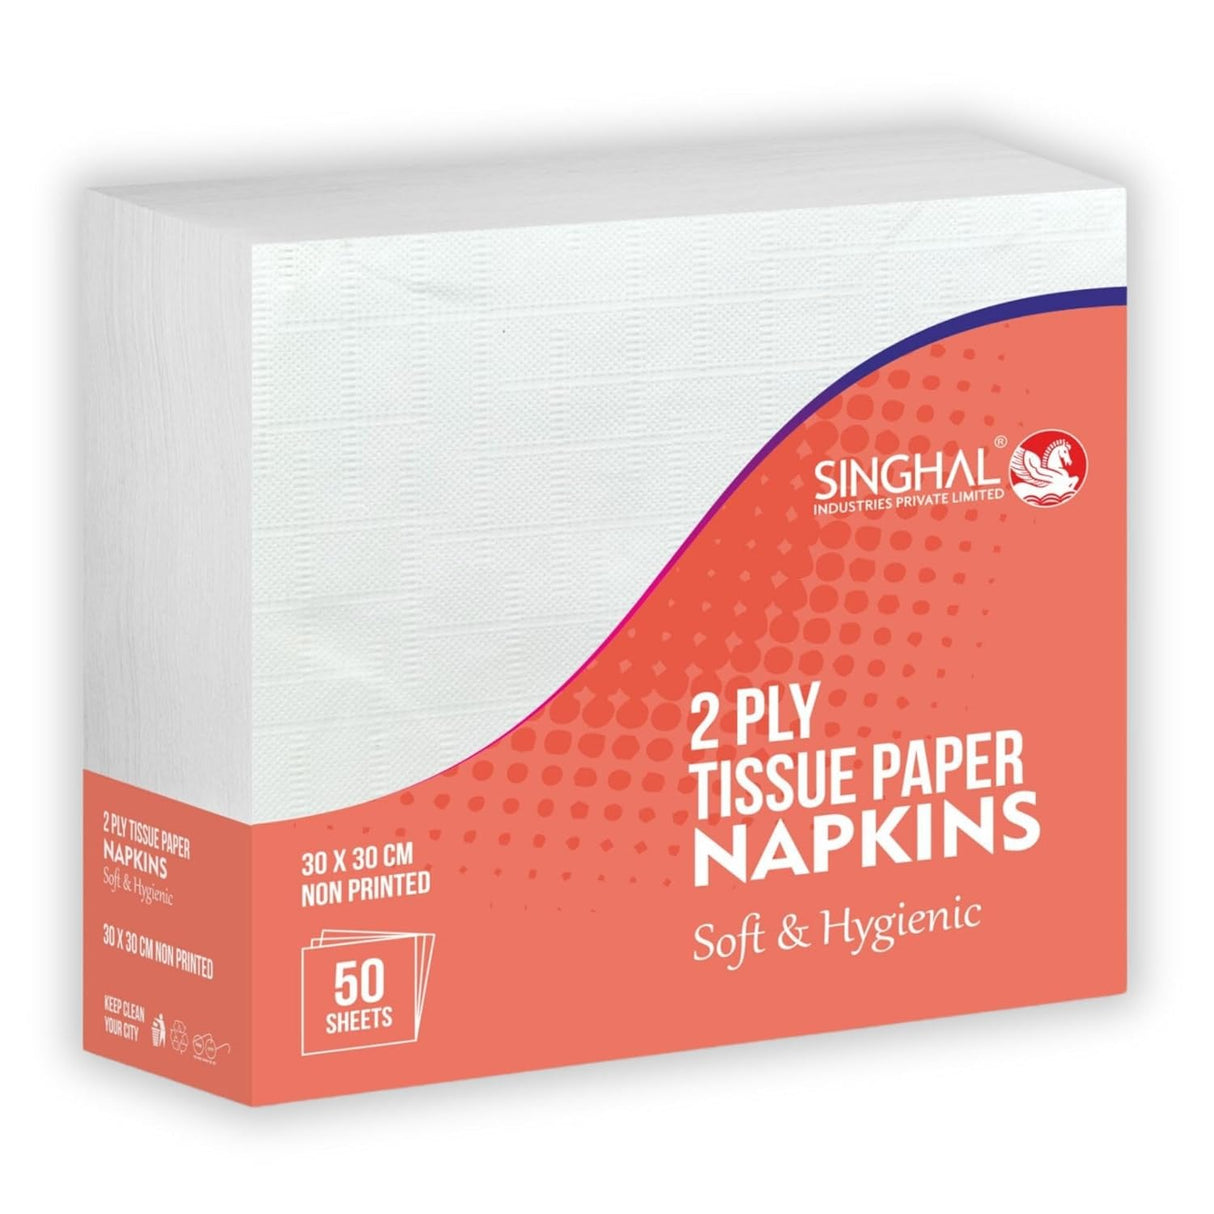 Singhal 2 Ply Tissue Paper Napkins Plain 30x30 CM - Pack of 3 (50 Pulls Per Pack, 150 Sheets)